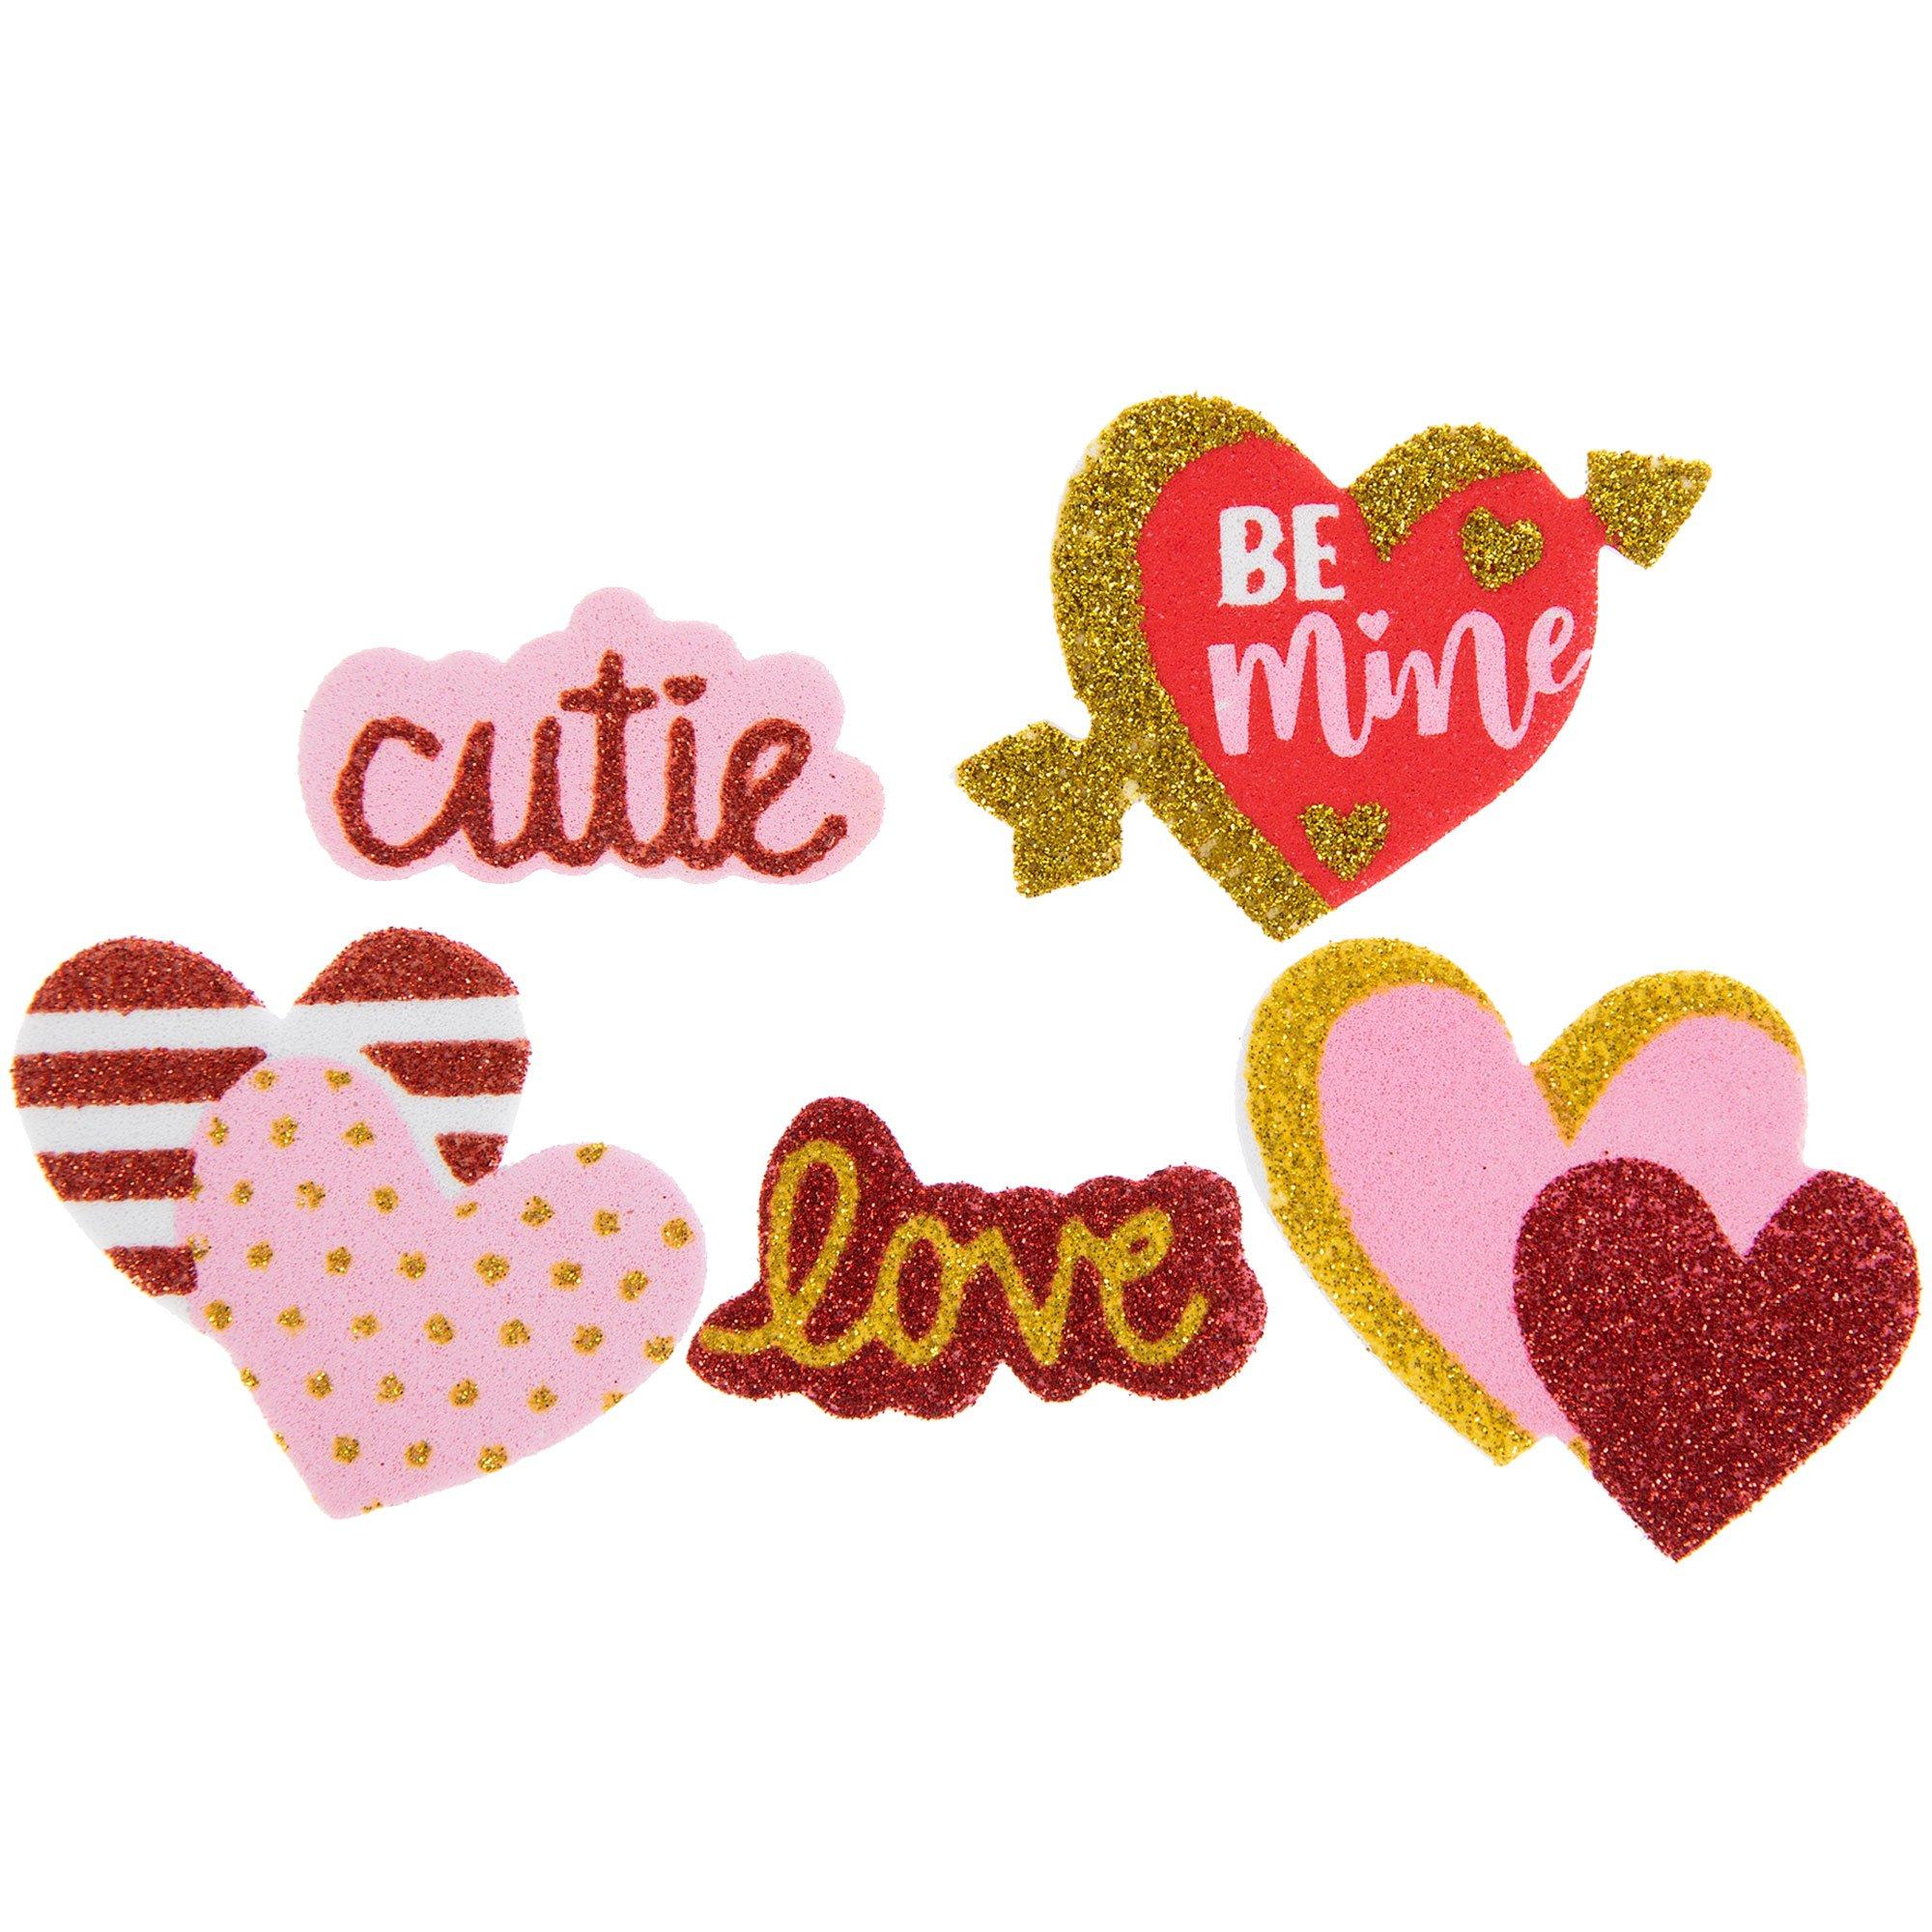 388 Pcs Valentine's Day Foam Heart Stickers Kit Includes 18 Pcs Colorful Large Foam Hearts and 370 Pcs Colorful Glitter Self-Adhesive Heart Foam